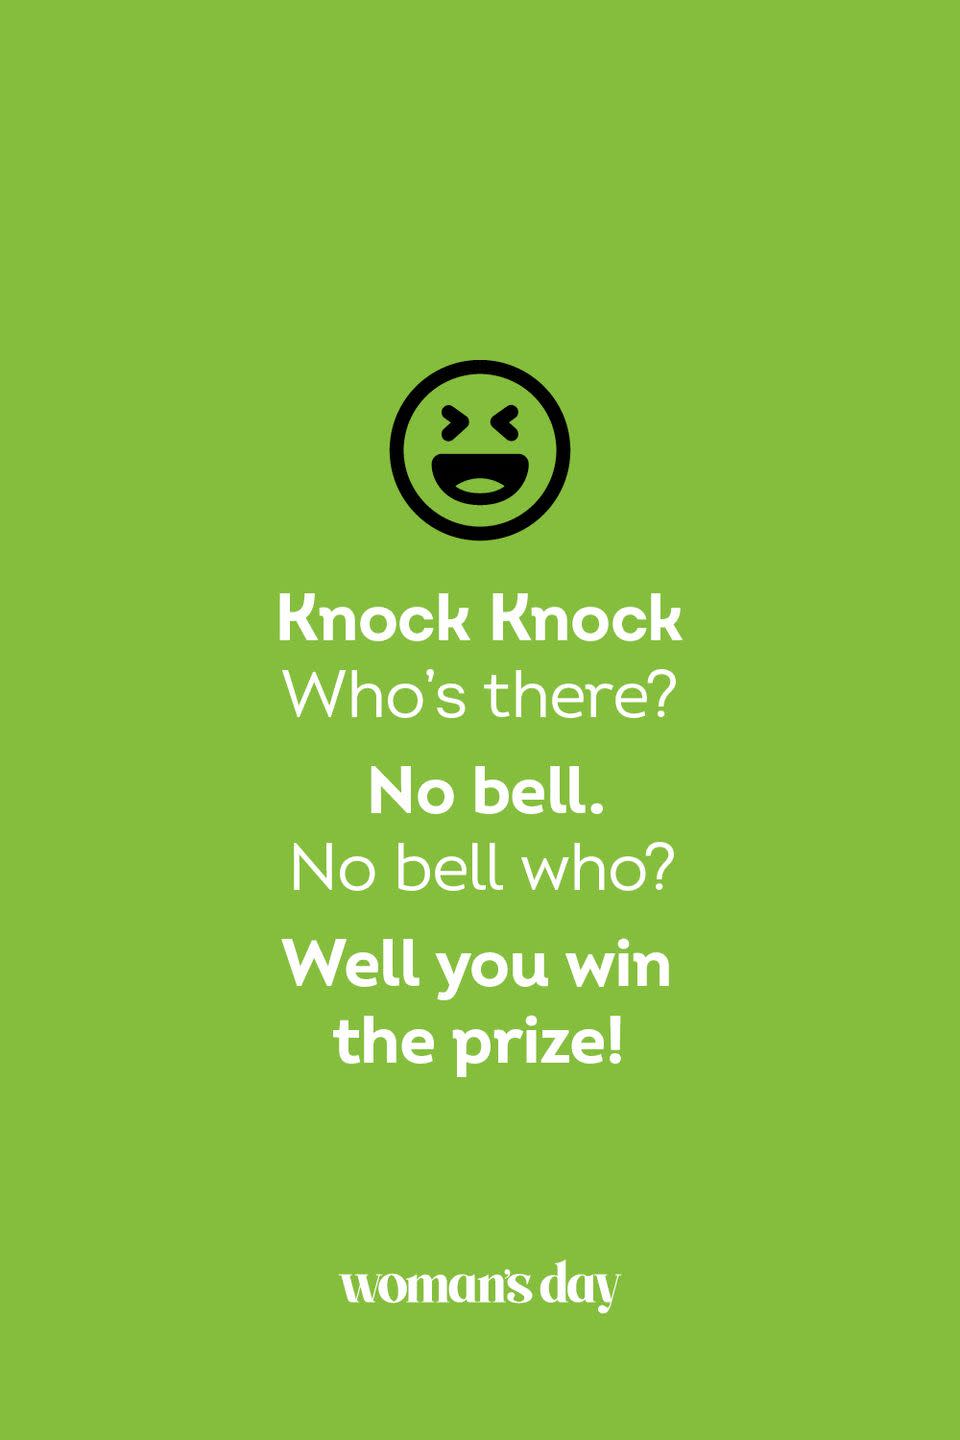 <p><strong>Knock Knock</strong></p><p><em>Who’s there? </em></p><p><strong>No bell.</strong></p><p><em>No bell who?</em></p><p><strong>Well you win the prize!</strong></p>